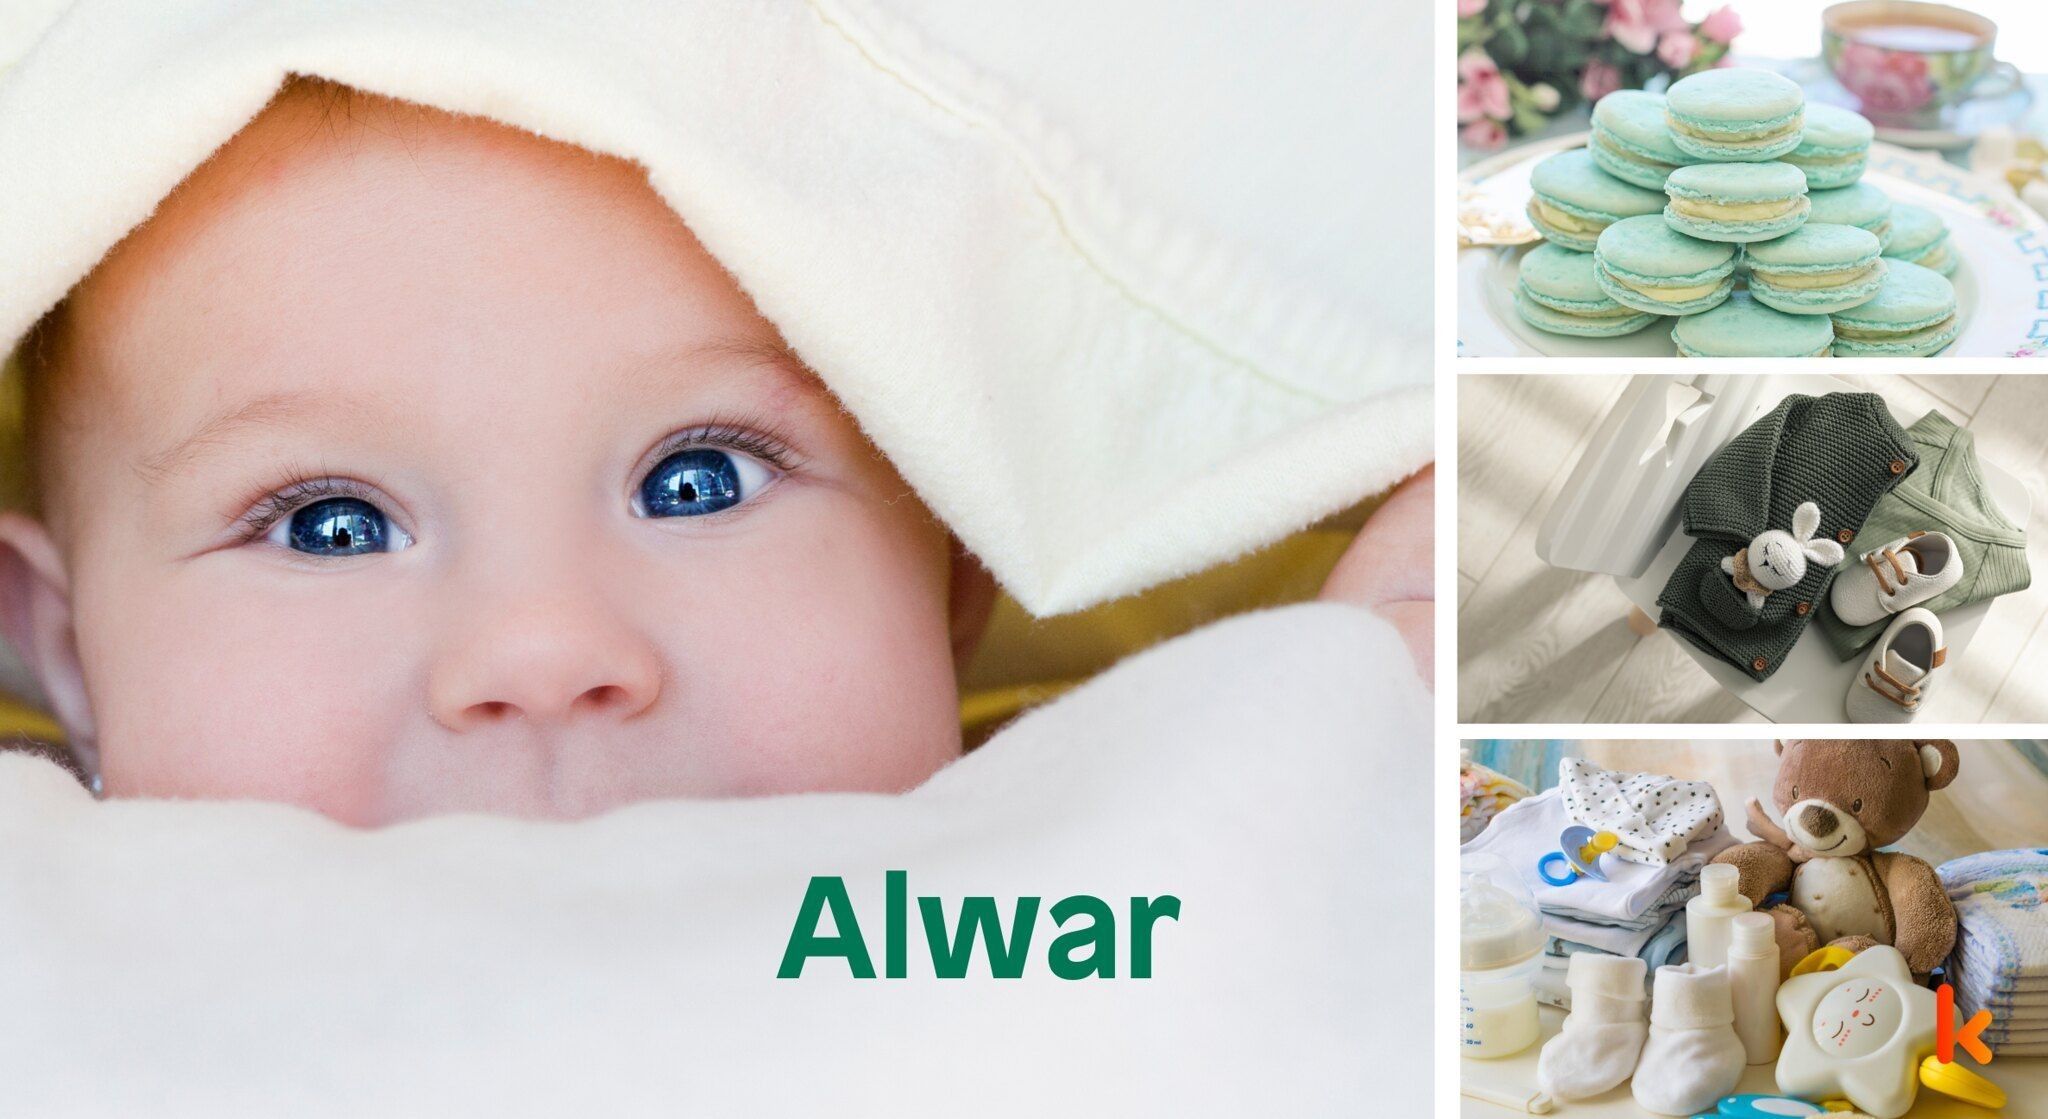 Meaning of the name Alwar